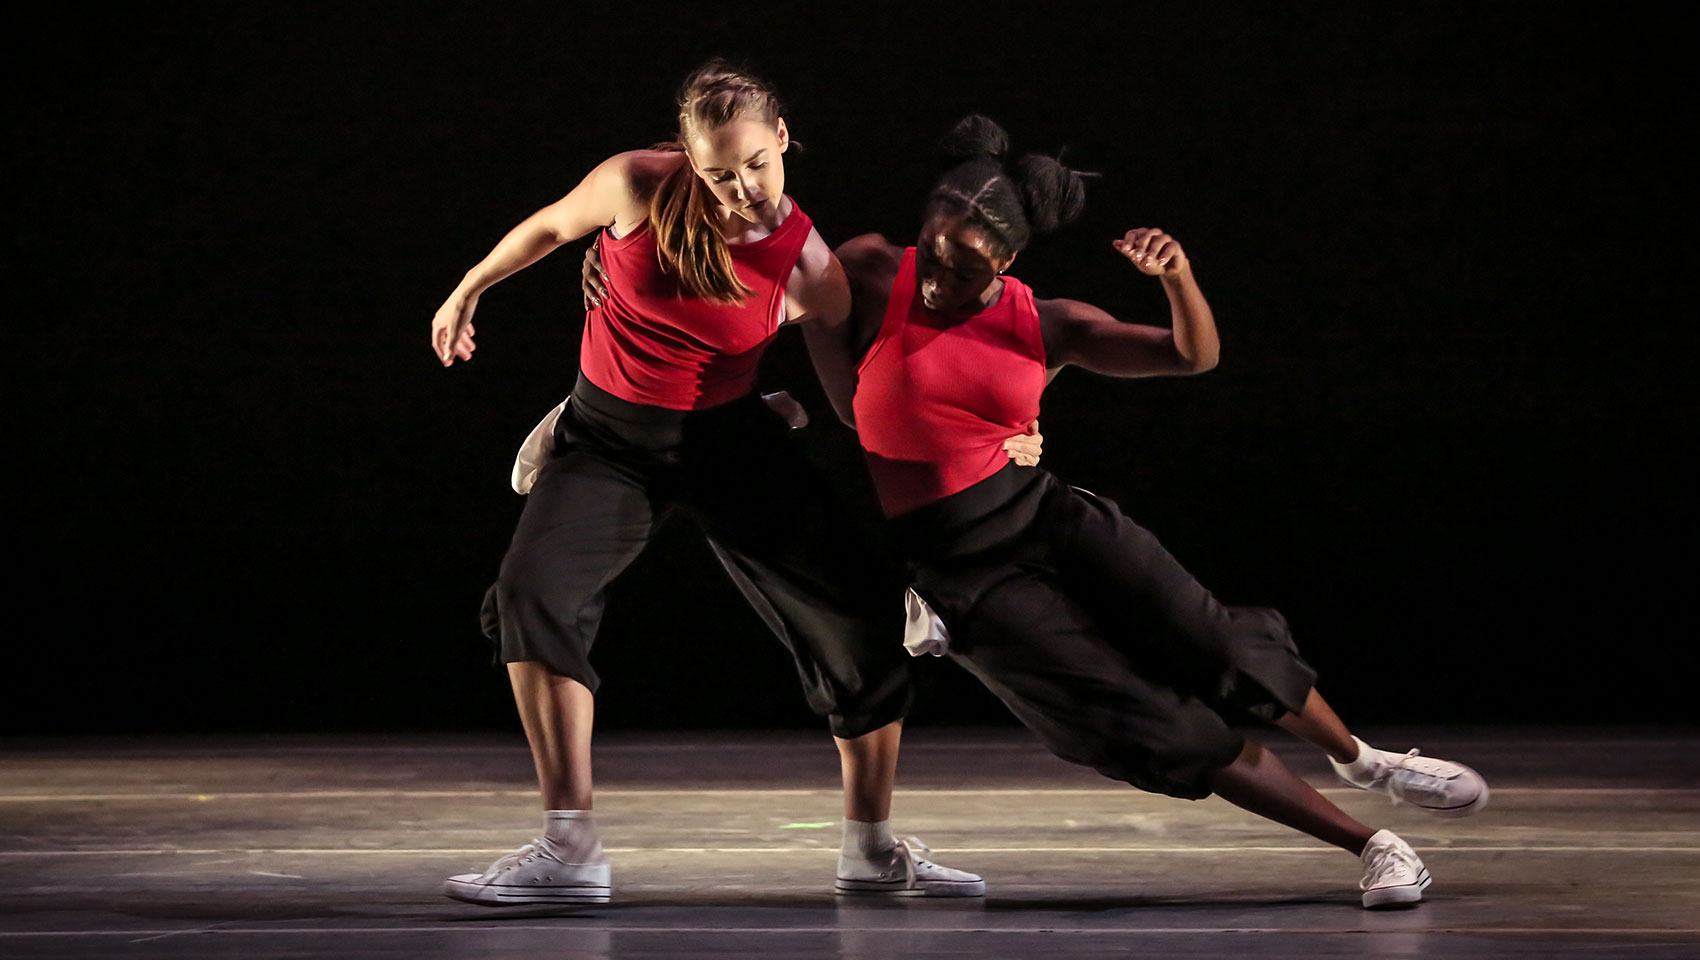 A female dancer supports another female dancer with her arm around her waist as she takes a turn around the floor.